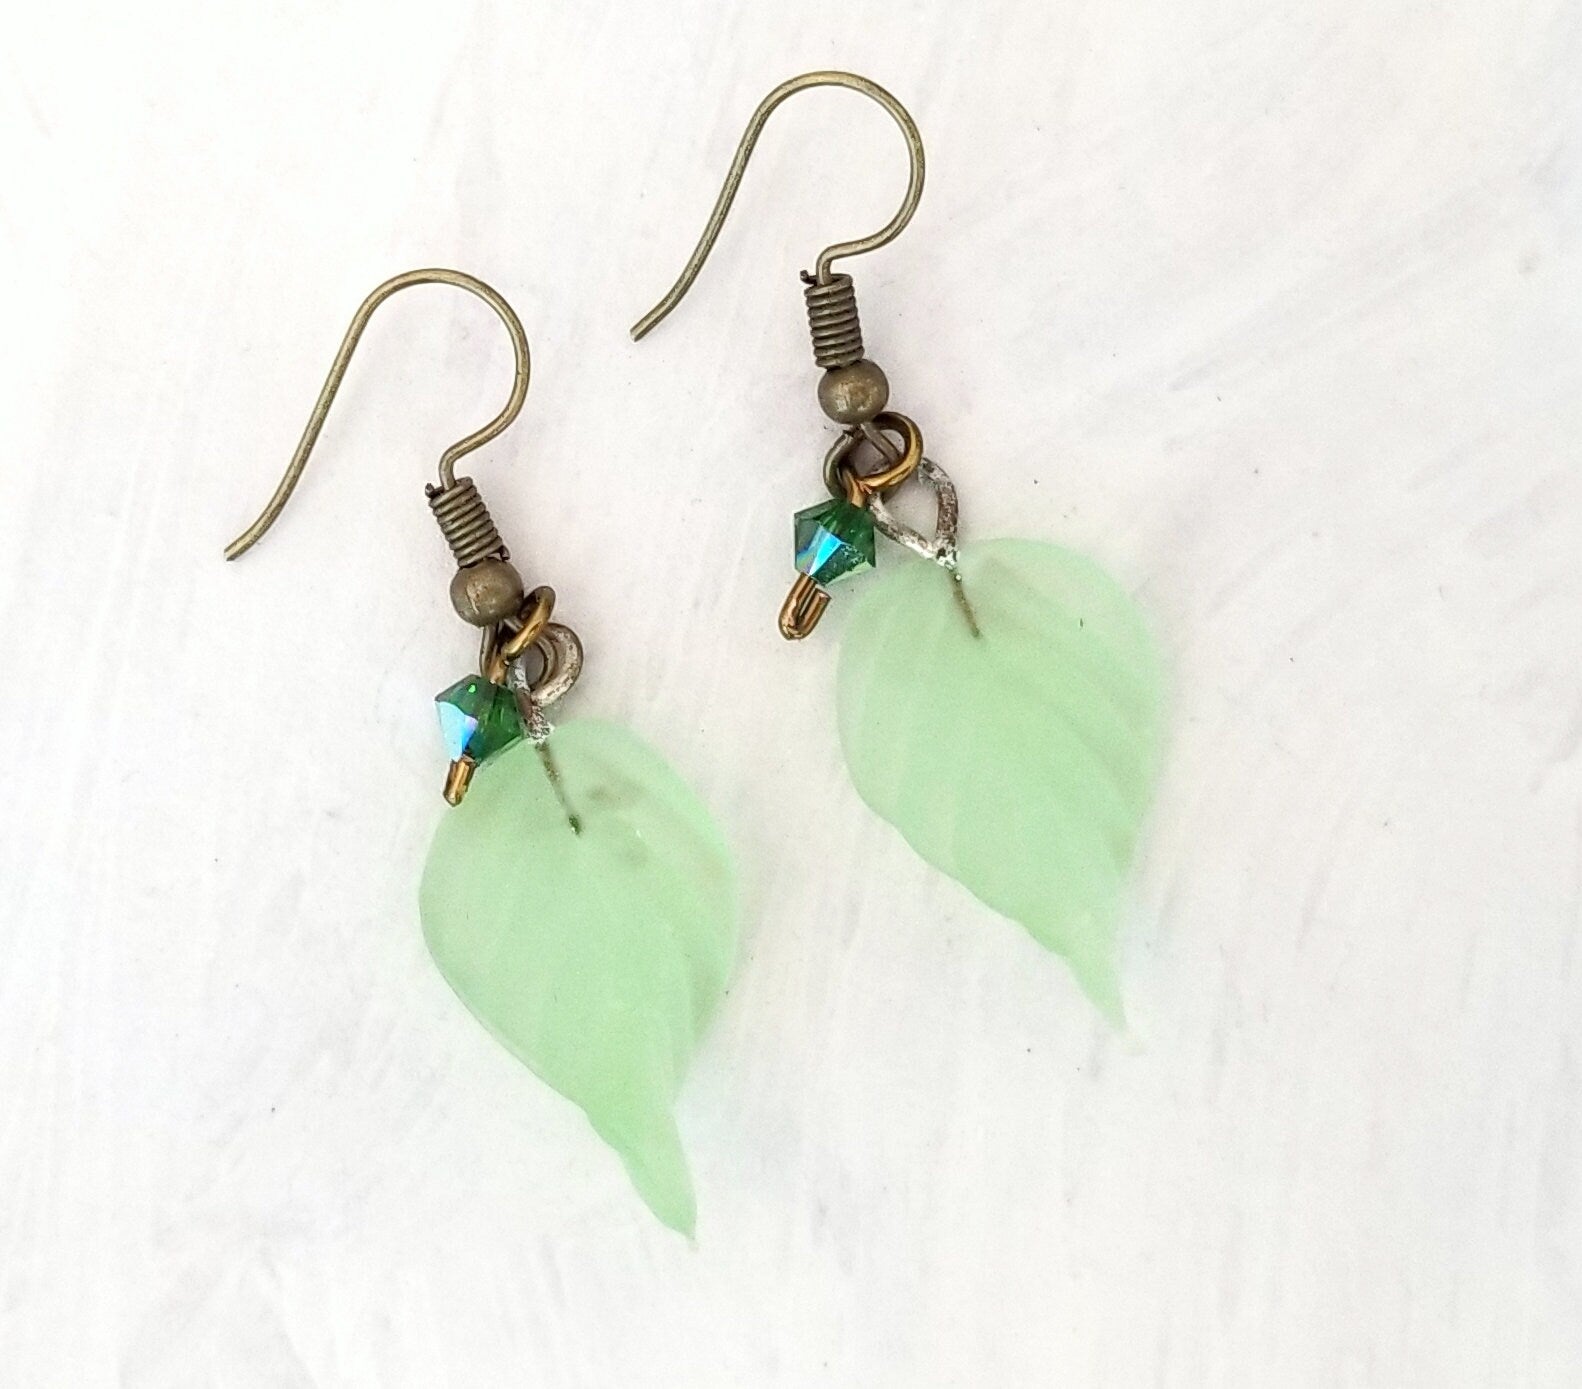 Long Glass Leaf Earrings in Frosted Light Green, Wedding, Bridesmaid, Art Nouveau, Renaissance, Forest, Choice of Closure Types